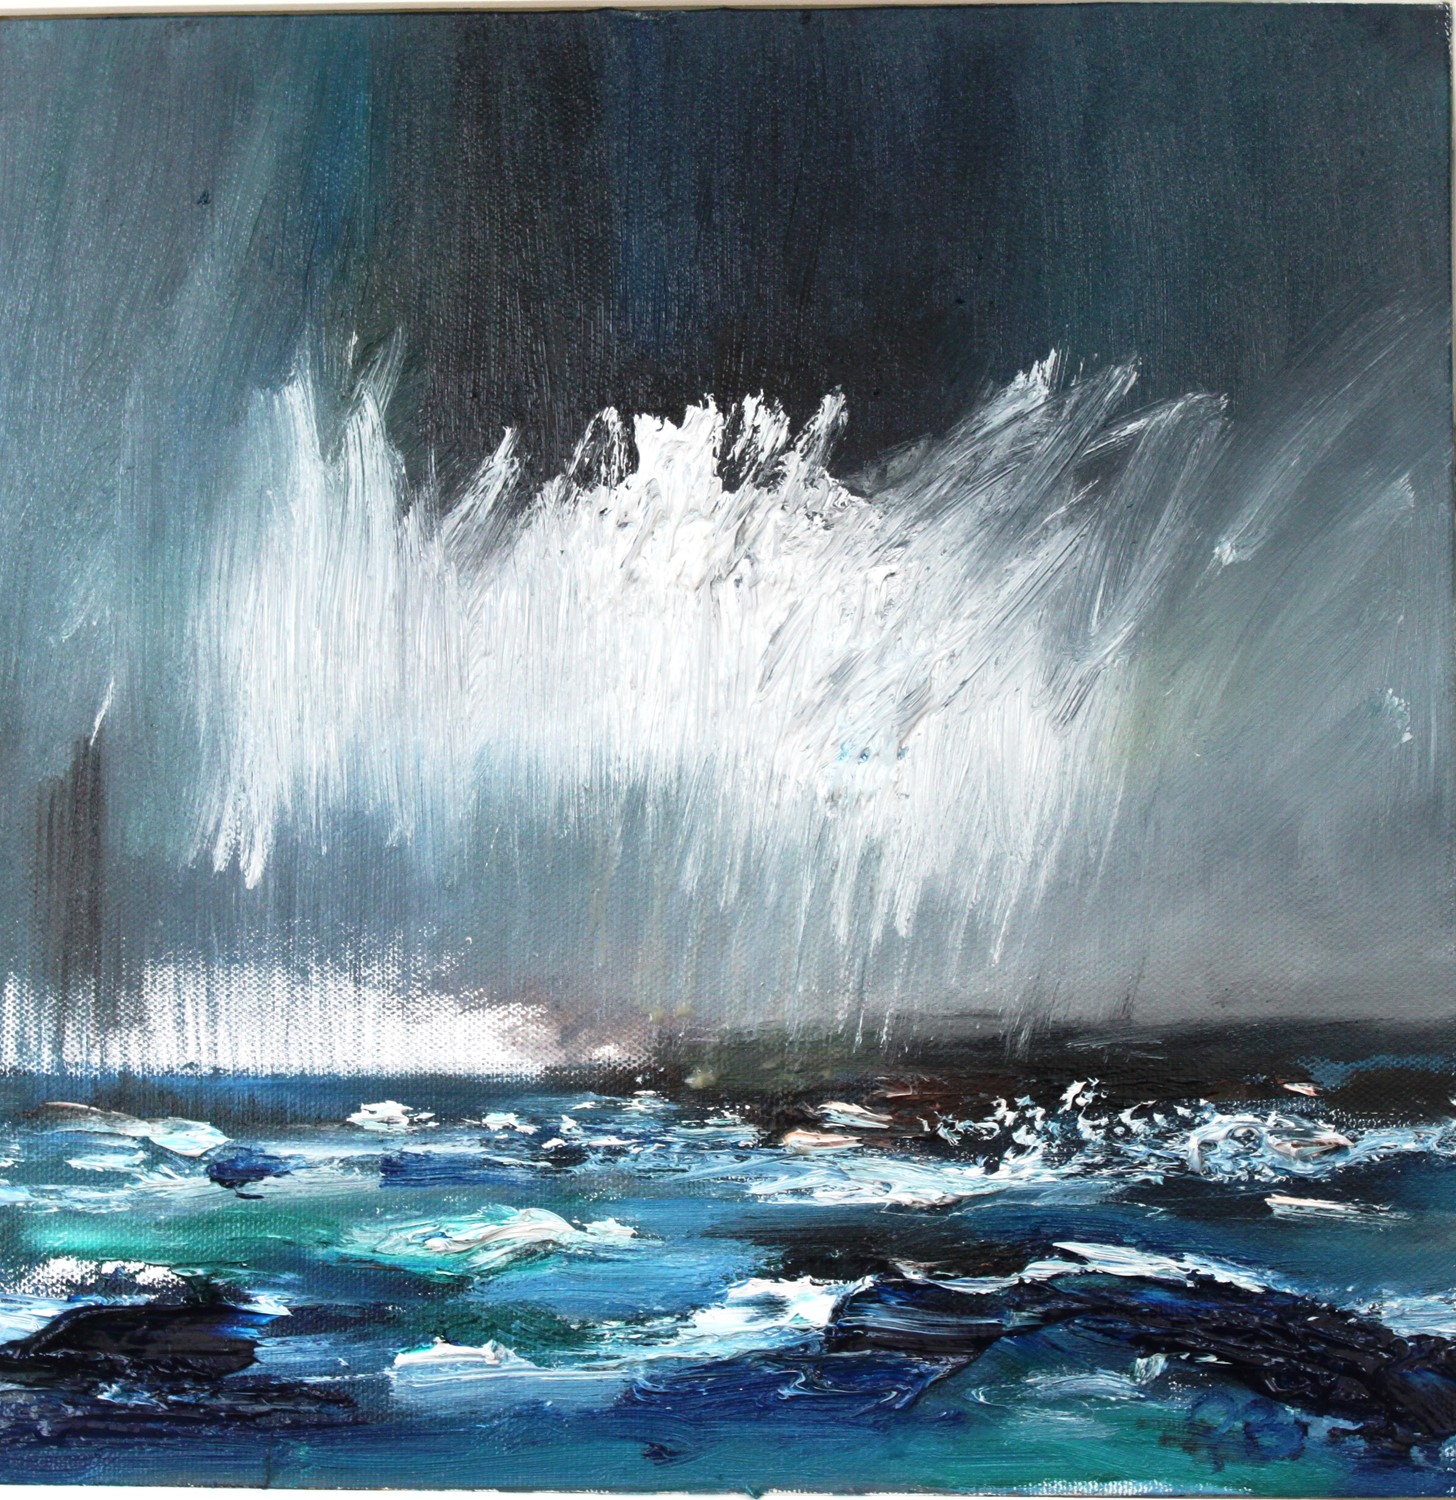 'Storm at Sea' by artist Rosanne Barr